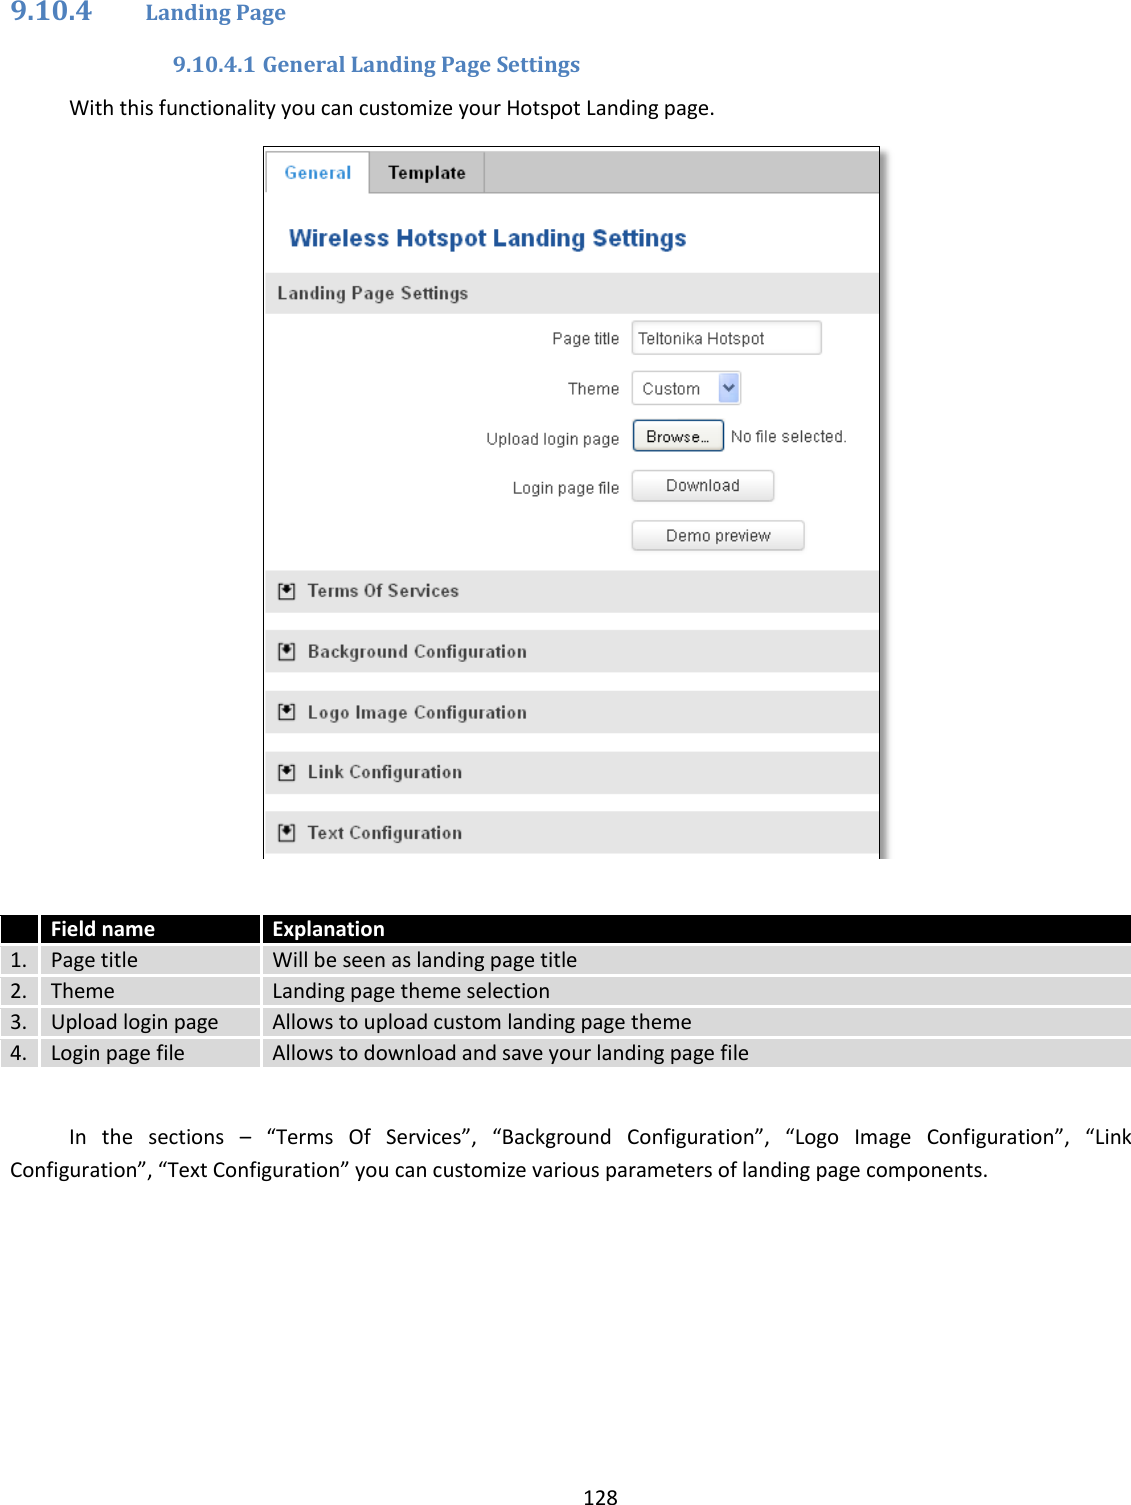  128  9.10.4 Landing Page 9.10.4.1 General Landing Page Settings With this functionality you can customize your Hotspot Landing page.    Field name Explanation 1. Page title Will be seen as landing page title 2. Theme Landing page theme selection 3. Upload login page Allows to upload custom landing page theme 4. Login page file Allows to download and save your landing page file    In  the  sections  – “Terms  Of  Services”,  “Background  Configuration”,  “Logo  Image  Configuration”,  “Link Configuration”, “Text Configuration” you can customize various parameters of landing page components.    